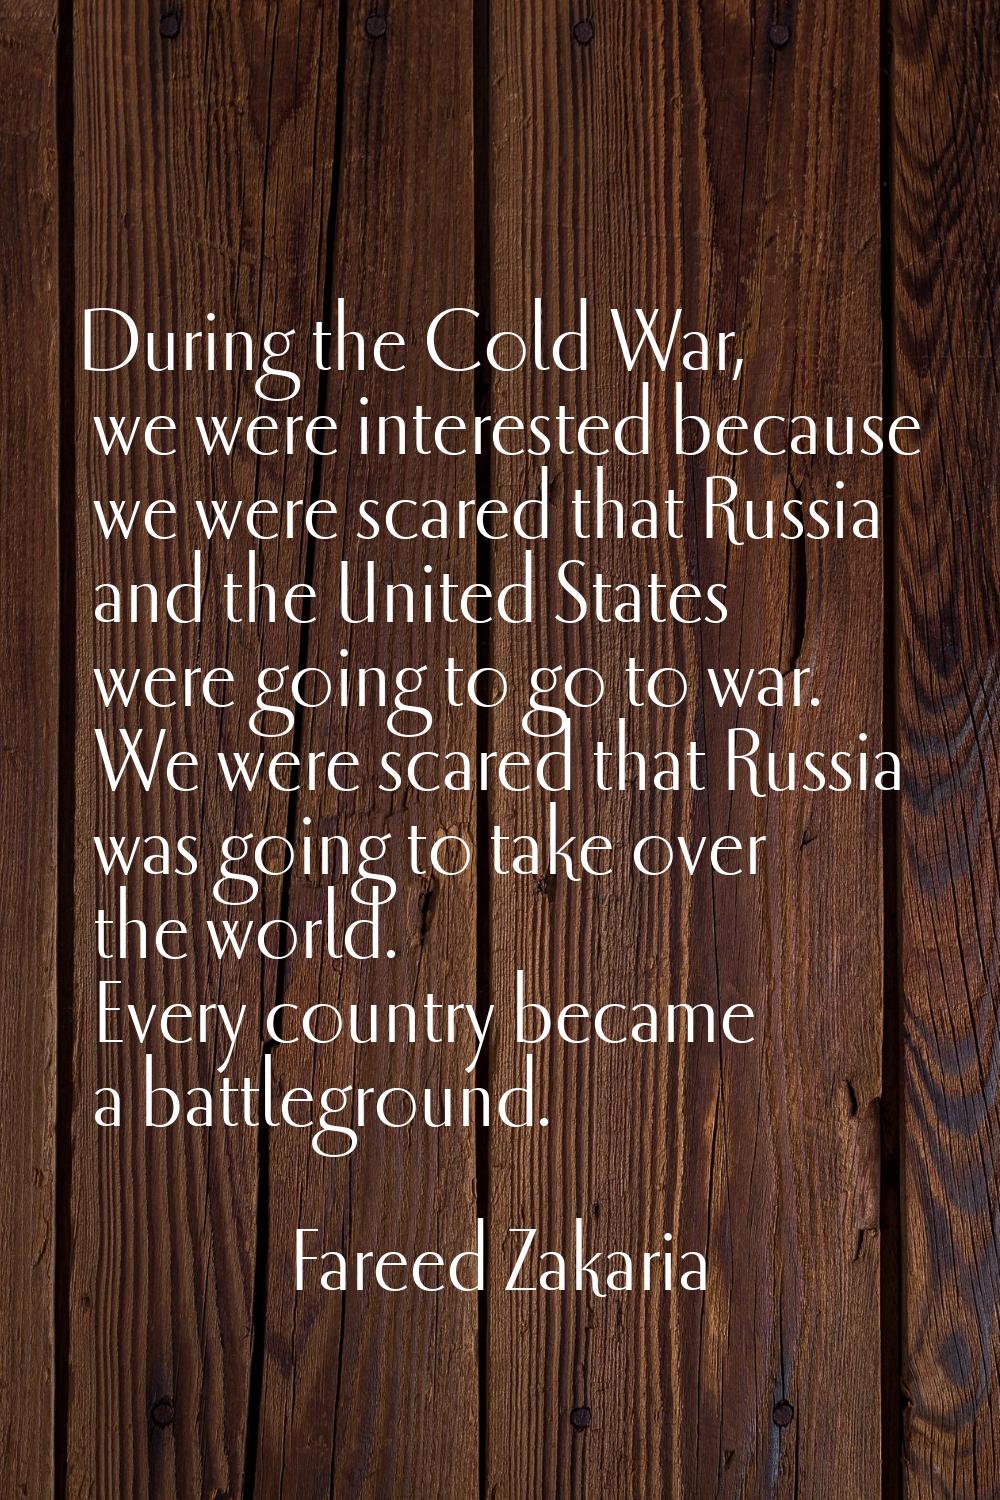 During the Cold War, we were interested because we were scared that Russia and the United States we